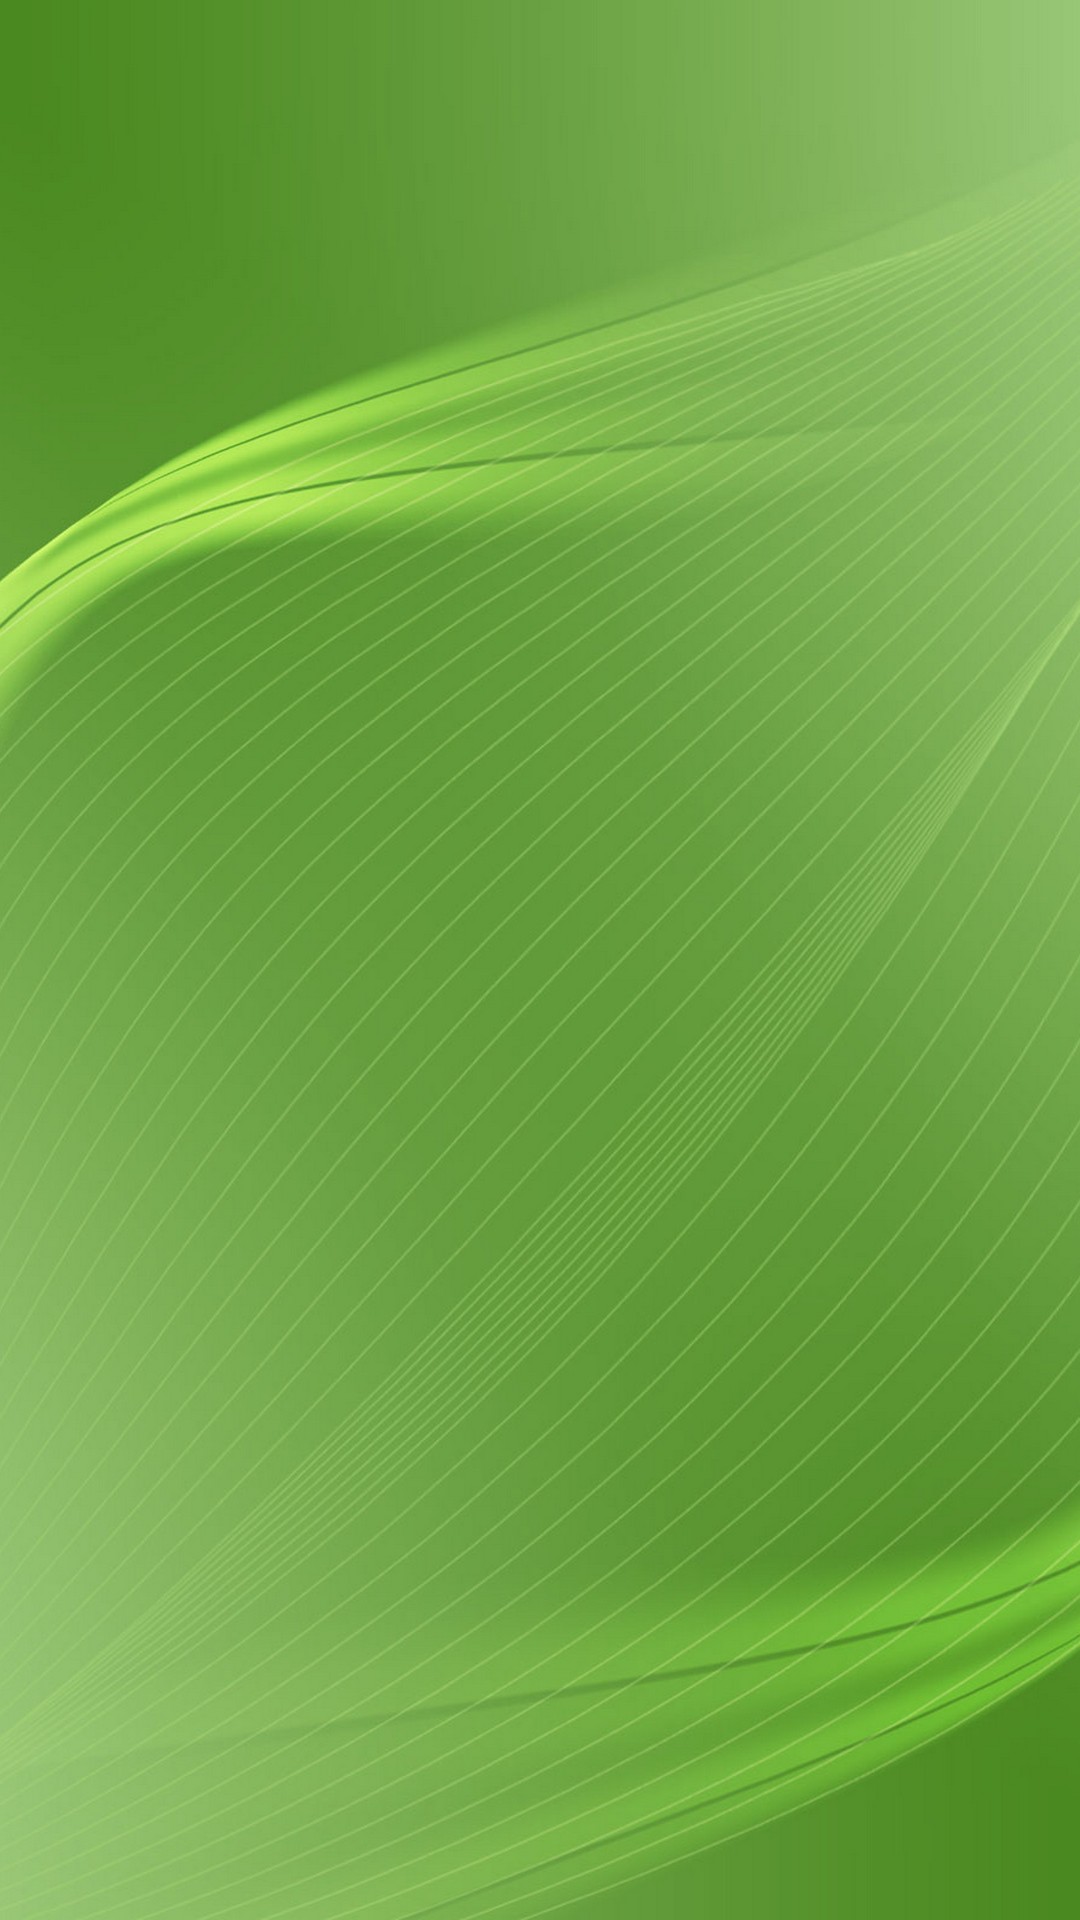 Android Wallpaper HD Green with resolution 1080X1920 pixel. You can make this wallpaper for your Android backgrounds, Tablet, Smartphones Screensavers and Mobile Phone Lock Screen